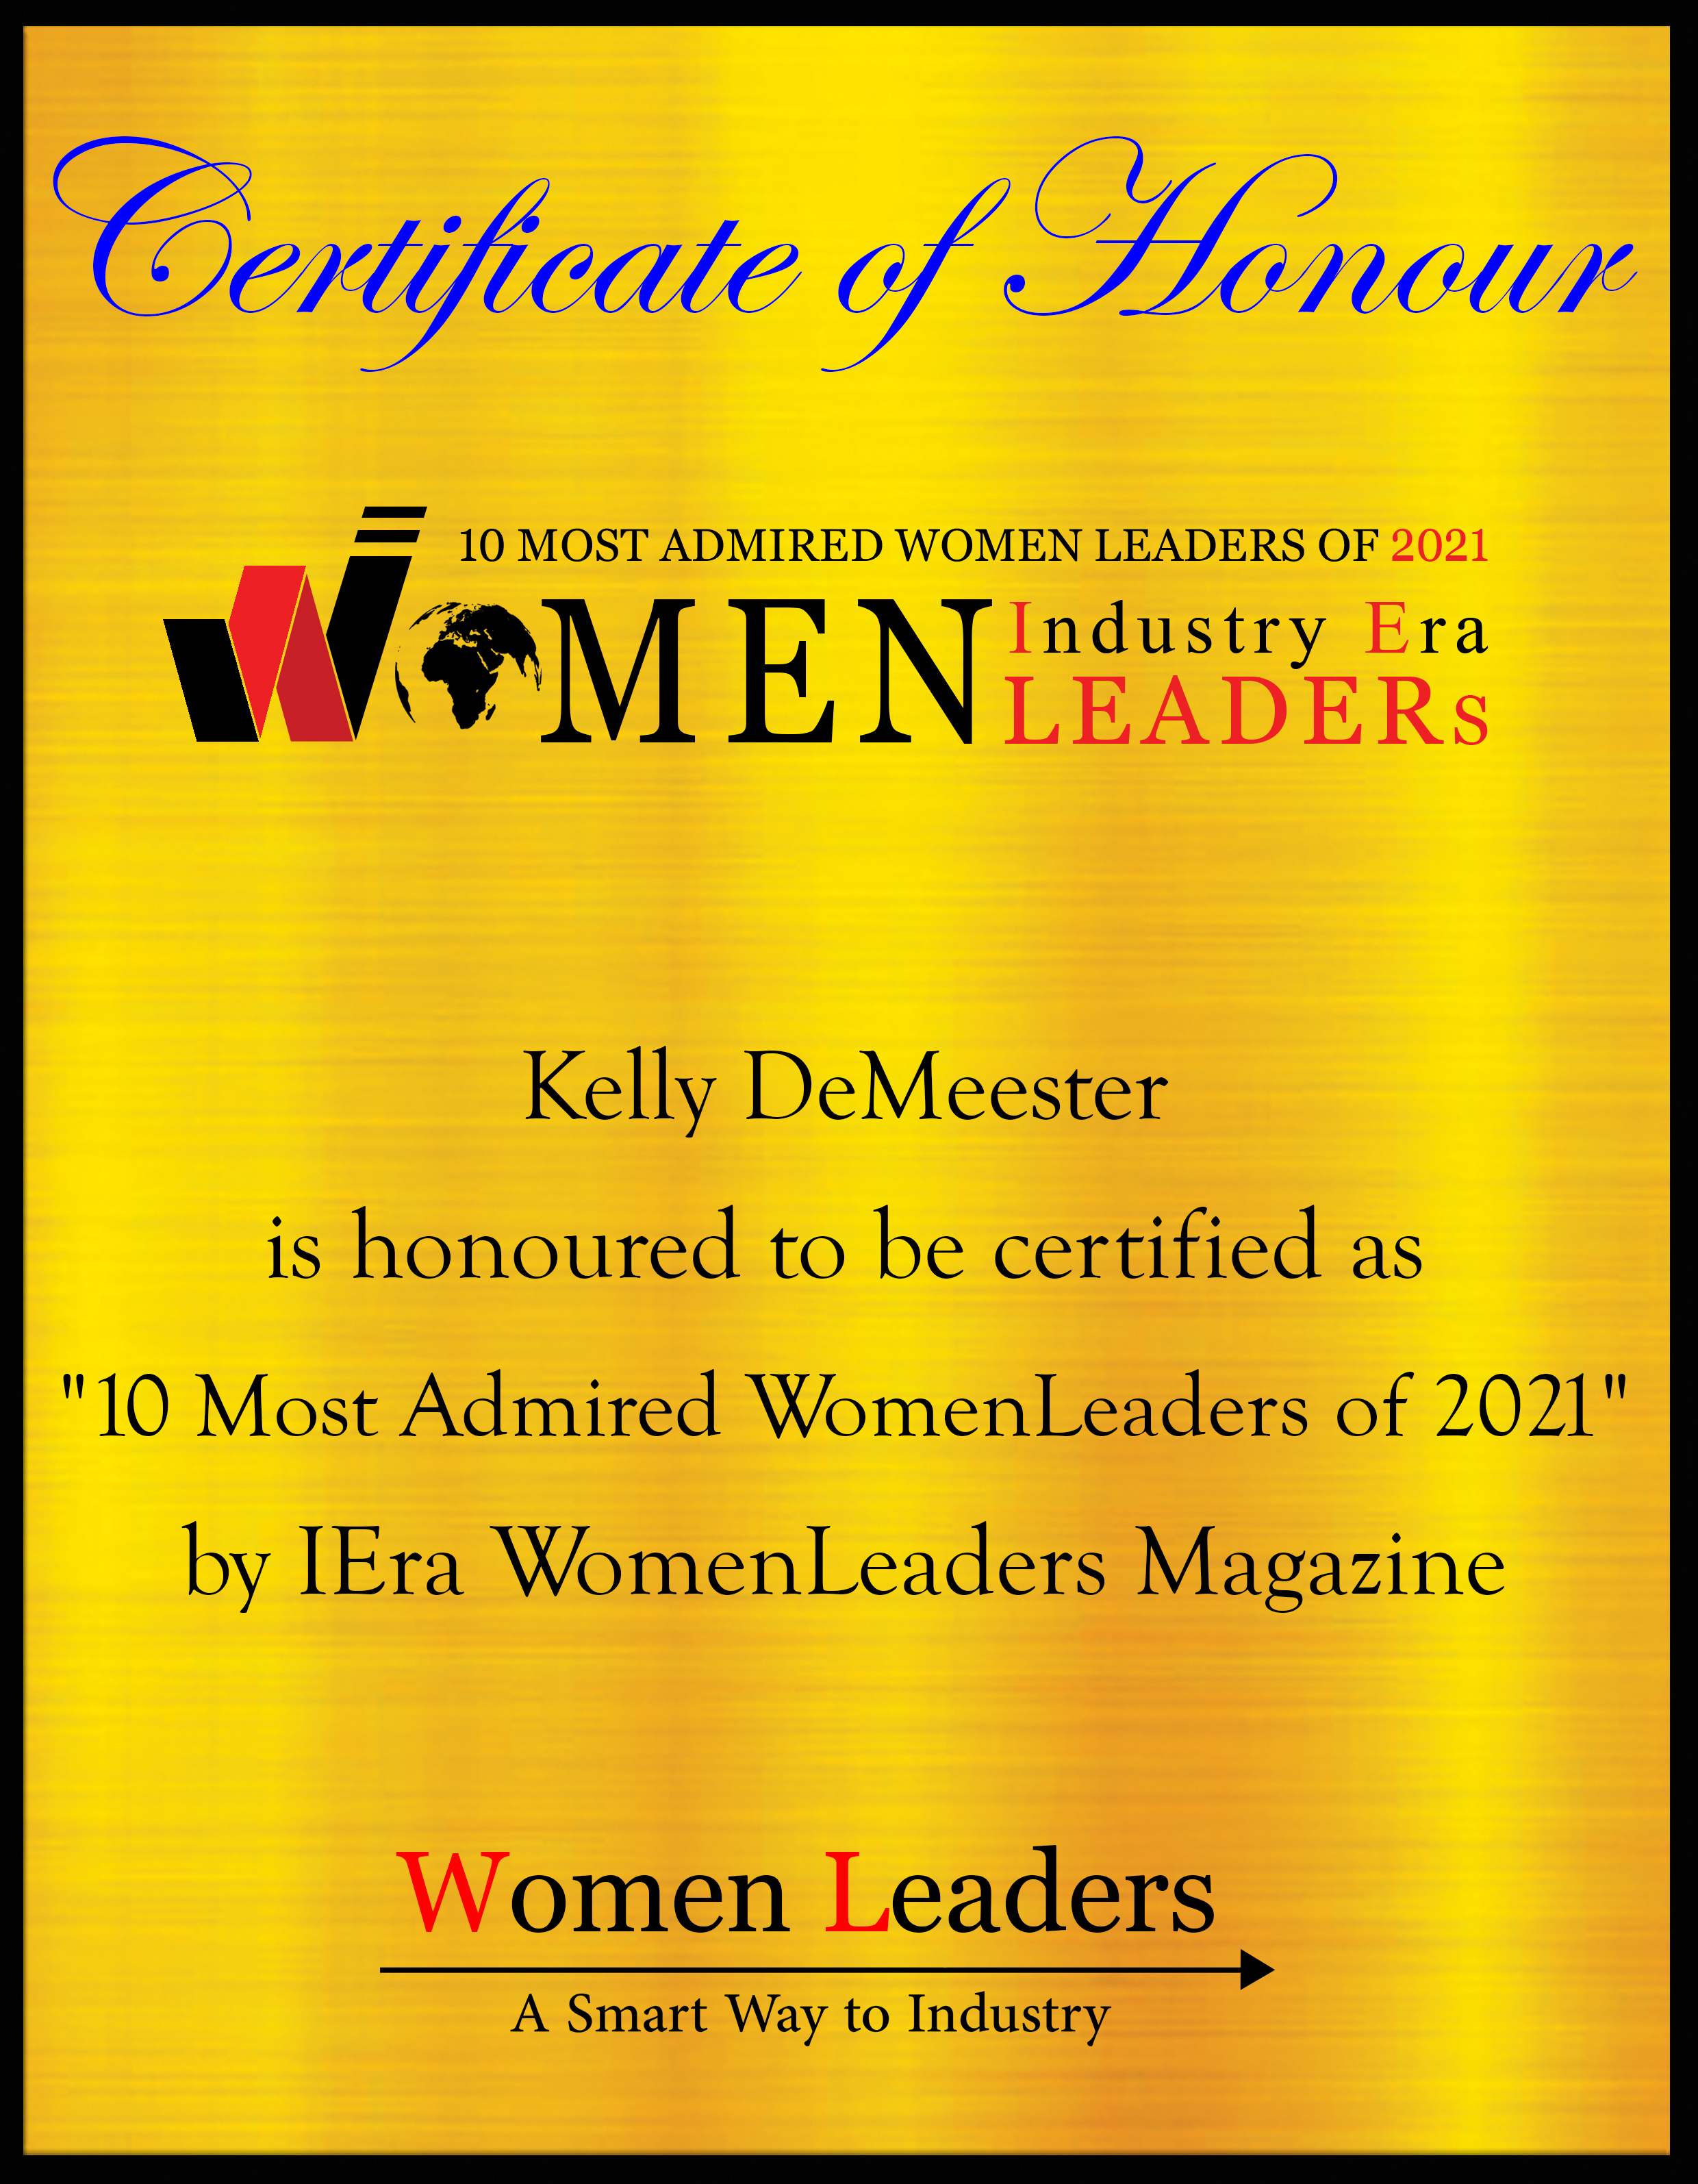 Kelly DeMeester, VP of Innovation at Renfro Corporation, Most Admired WomenLeaders of 2021